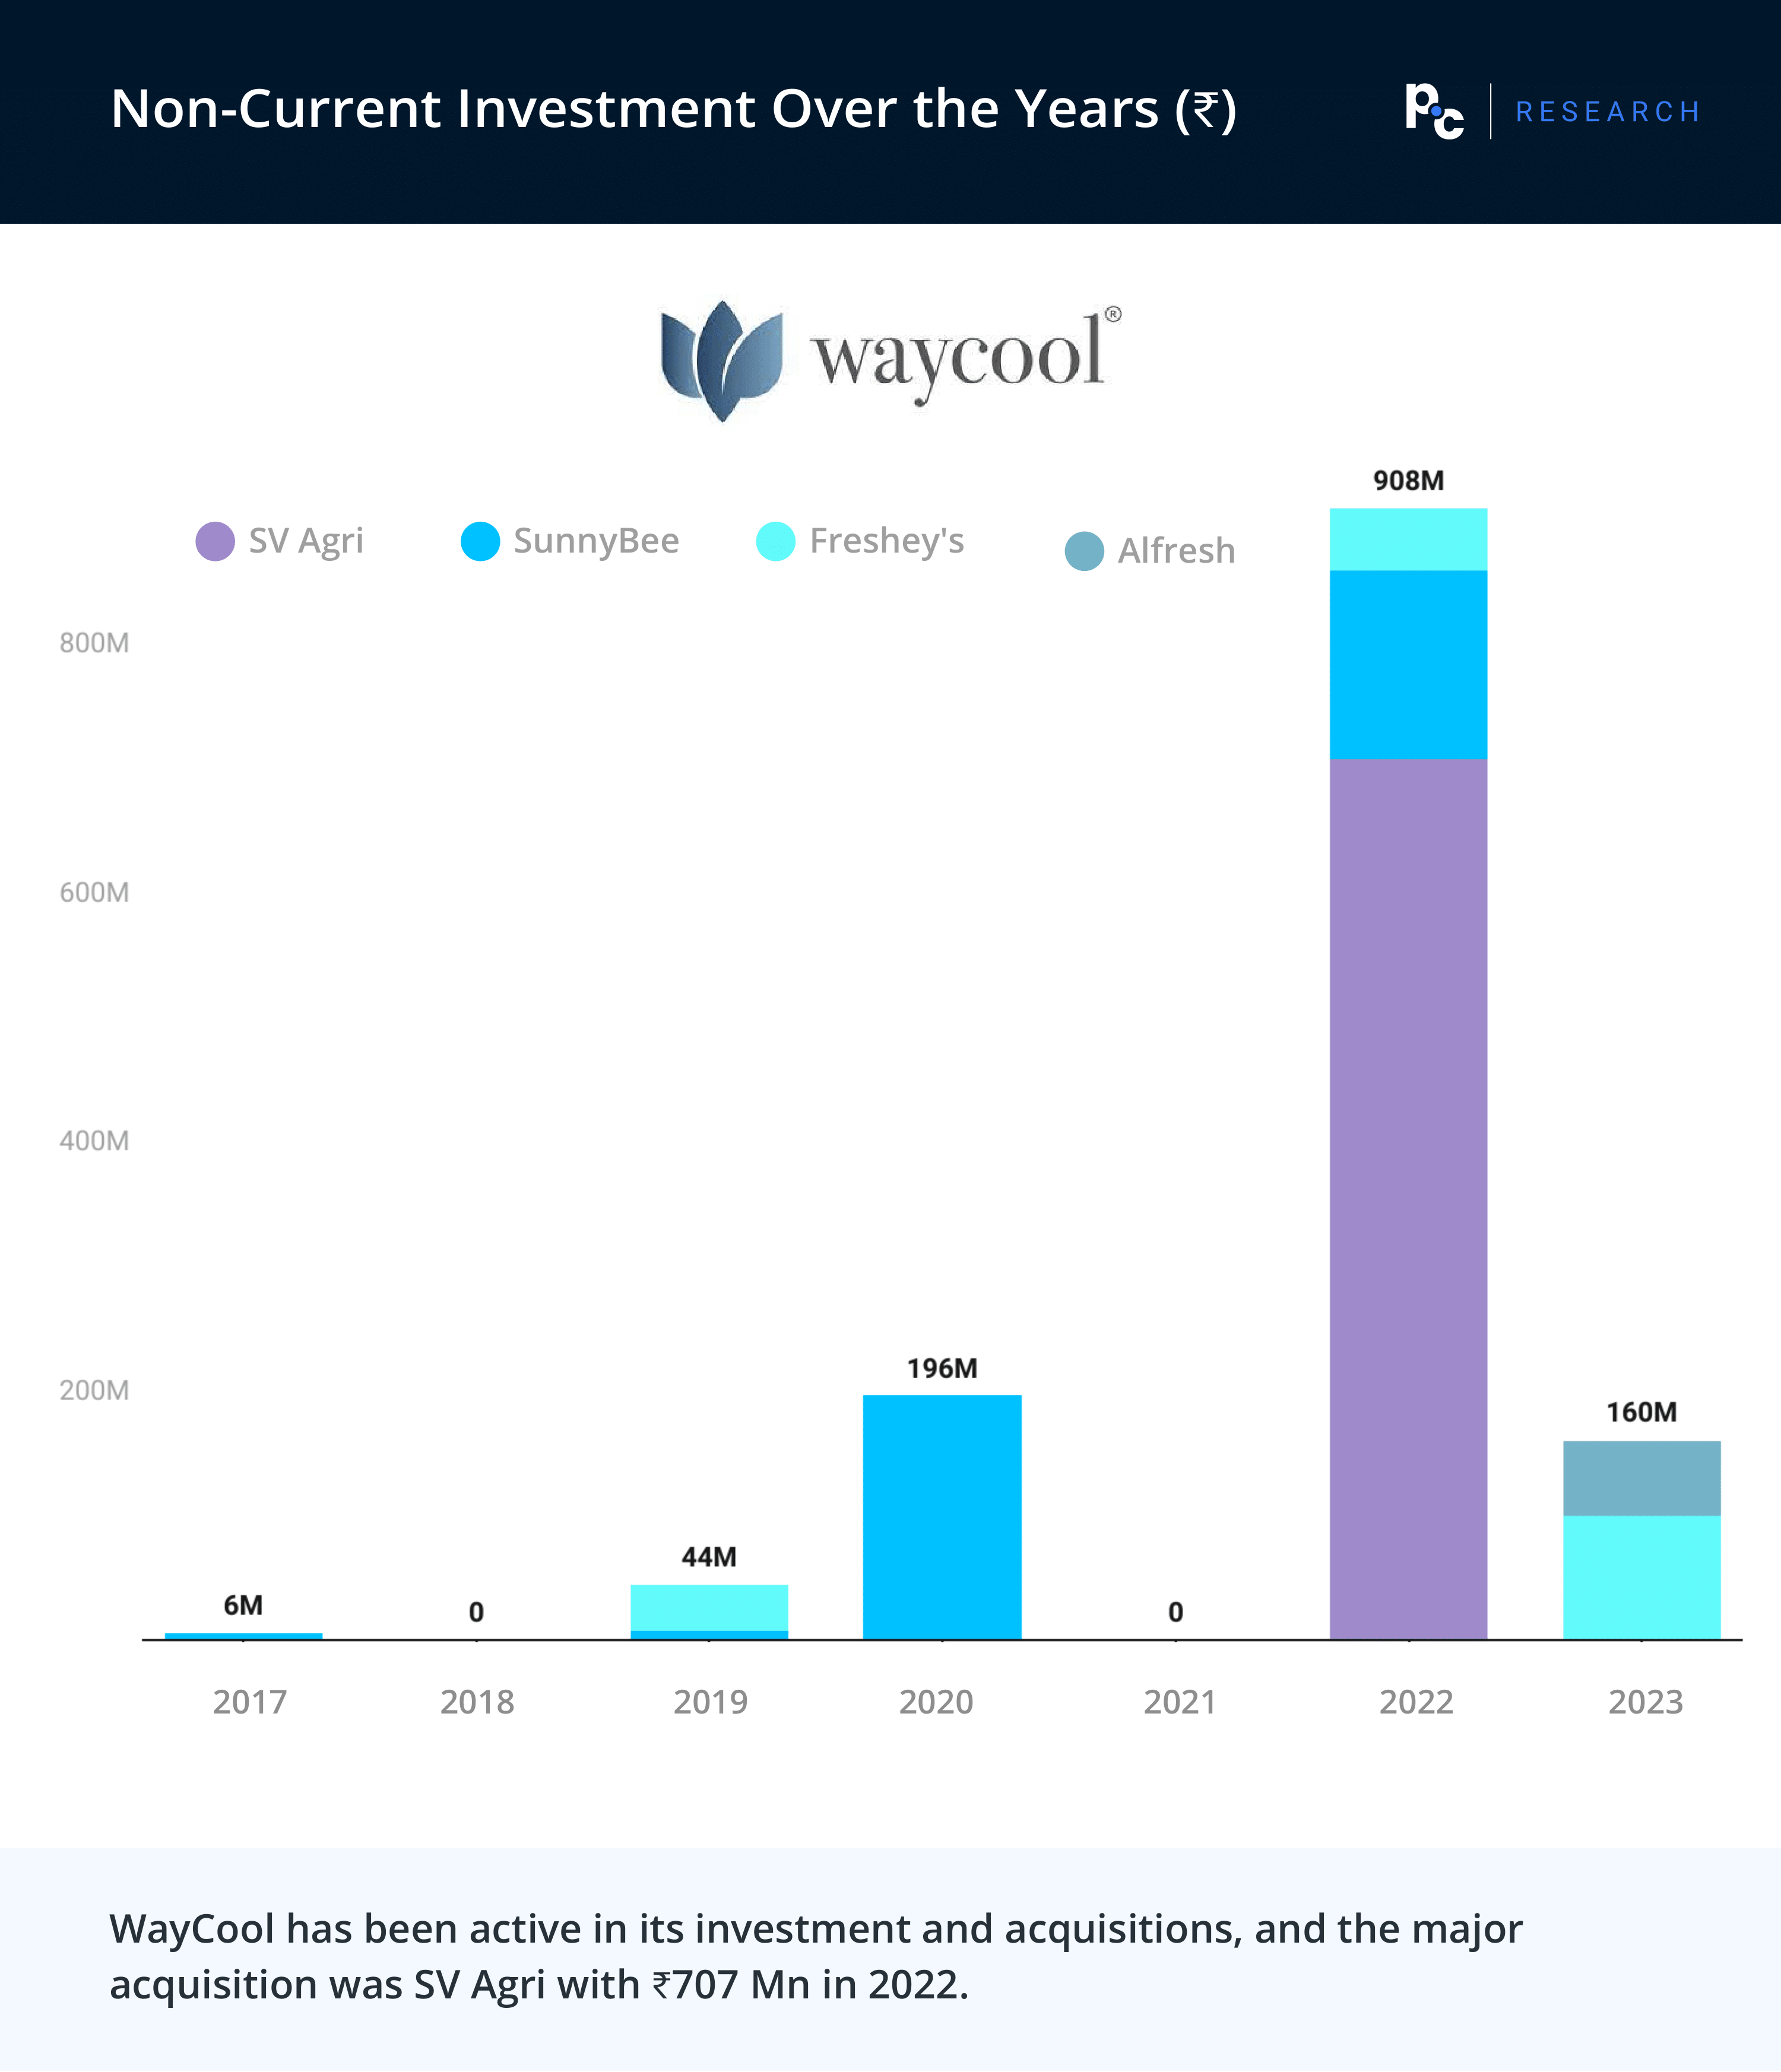 WayCool: Non-Current Investment over the years (₹)

WayCool has been active in its investment and acquisitions, and the major acquisition was SV Agri with ₹707 Mn in 2022.